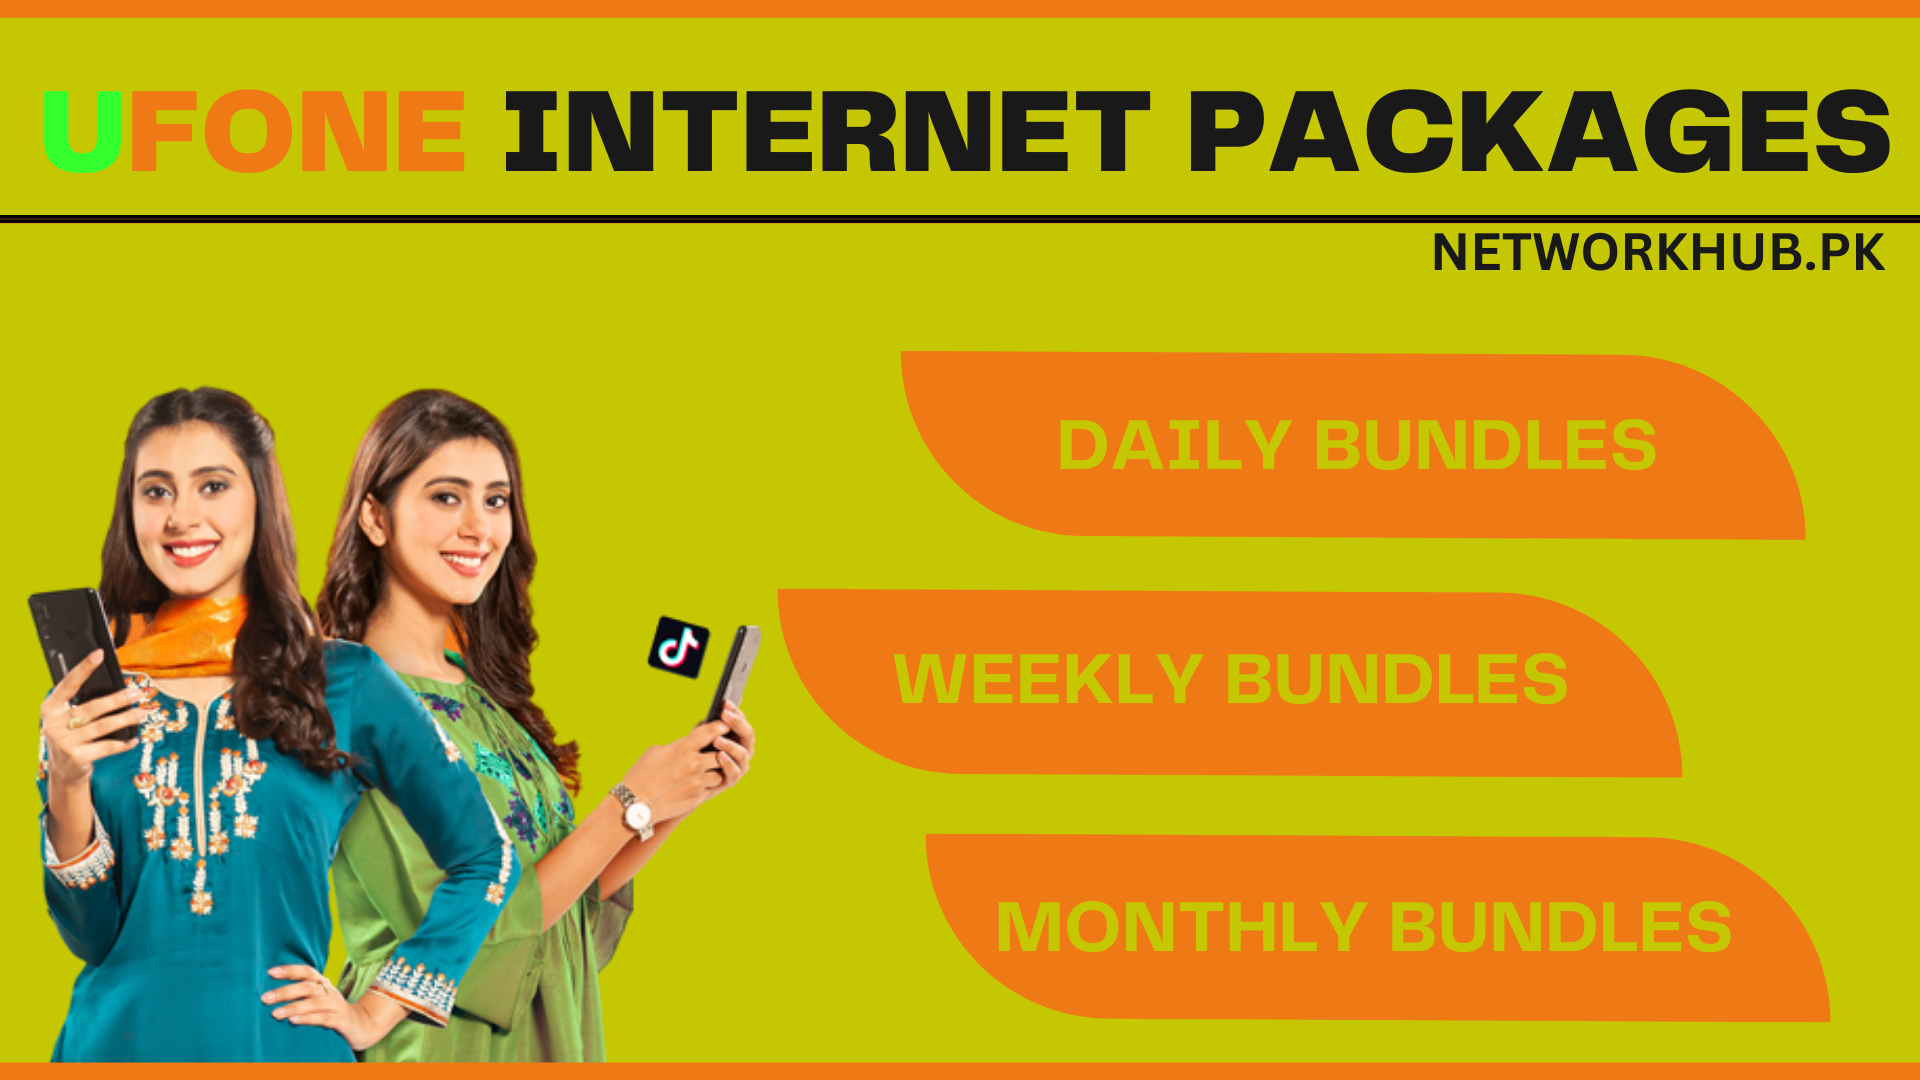 Ufone Internet Packages - Network Hub